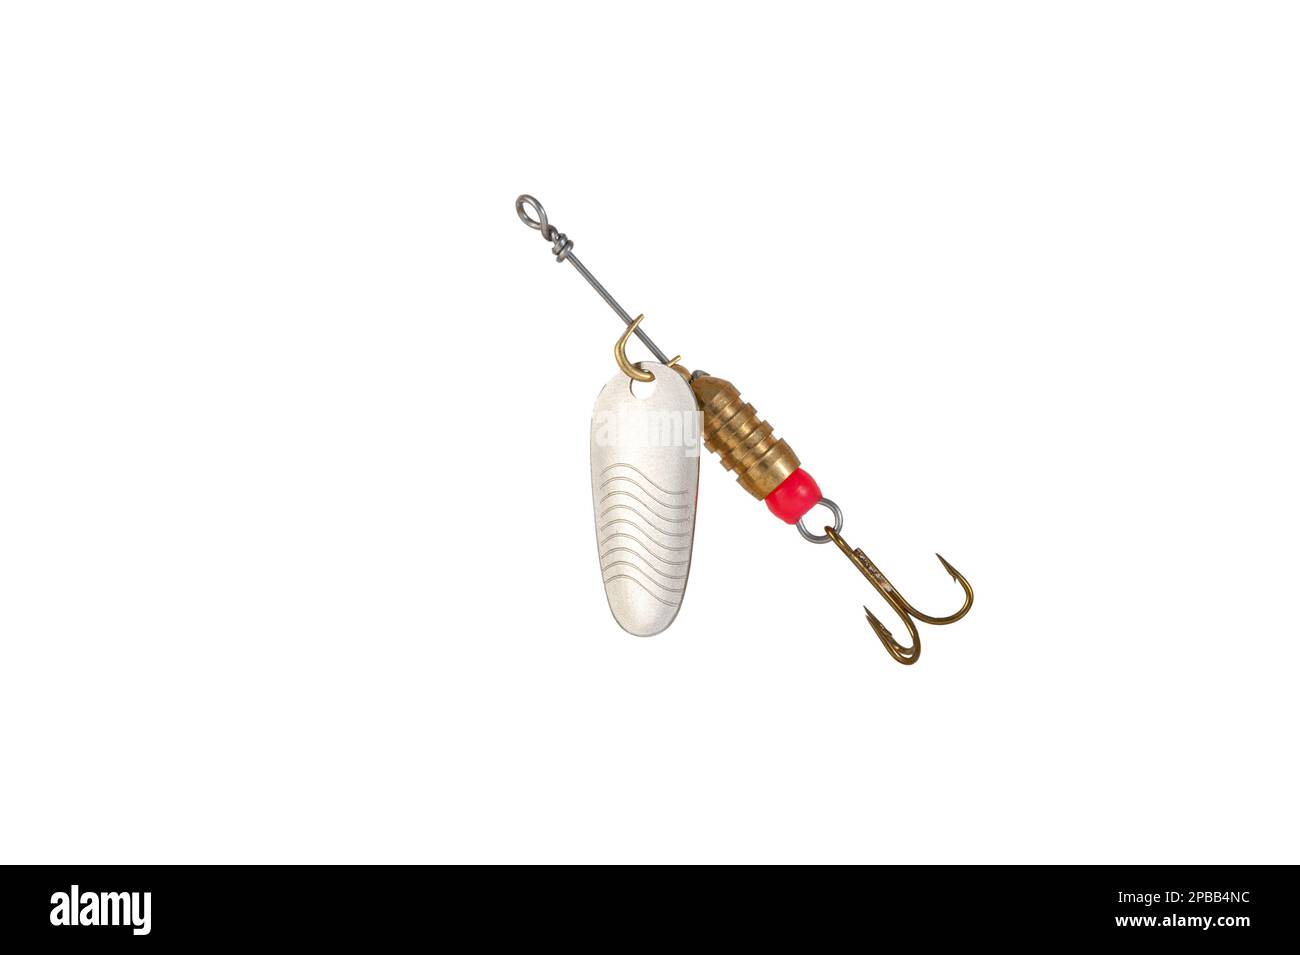 Spoon bait Cut Out Stock Images & Pictures - Page 2 - Alamy